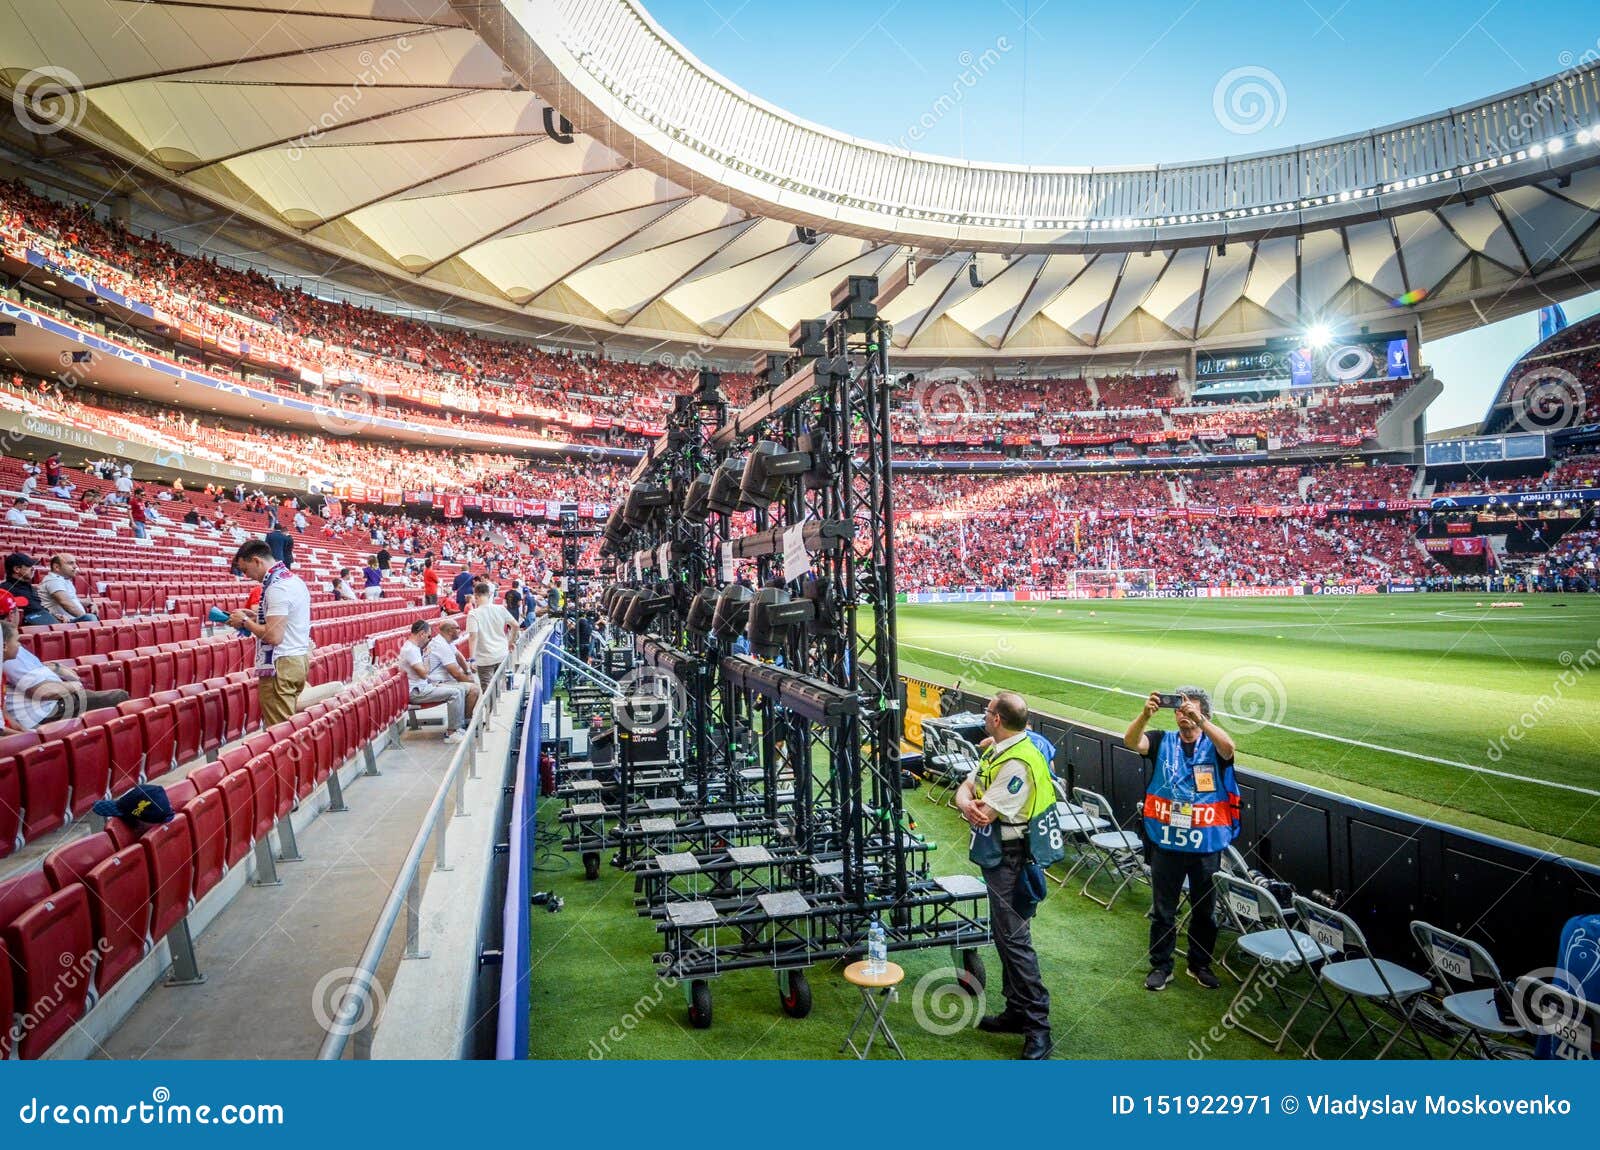 Madrid, Spain - 01 MAY 2019: General View Wanda Metropolitano Stadium in Daytime during the UEFA Champions League 2019 Editorial Photo - Image of football, exercise: 151922971